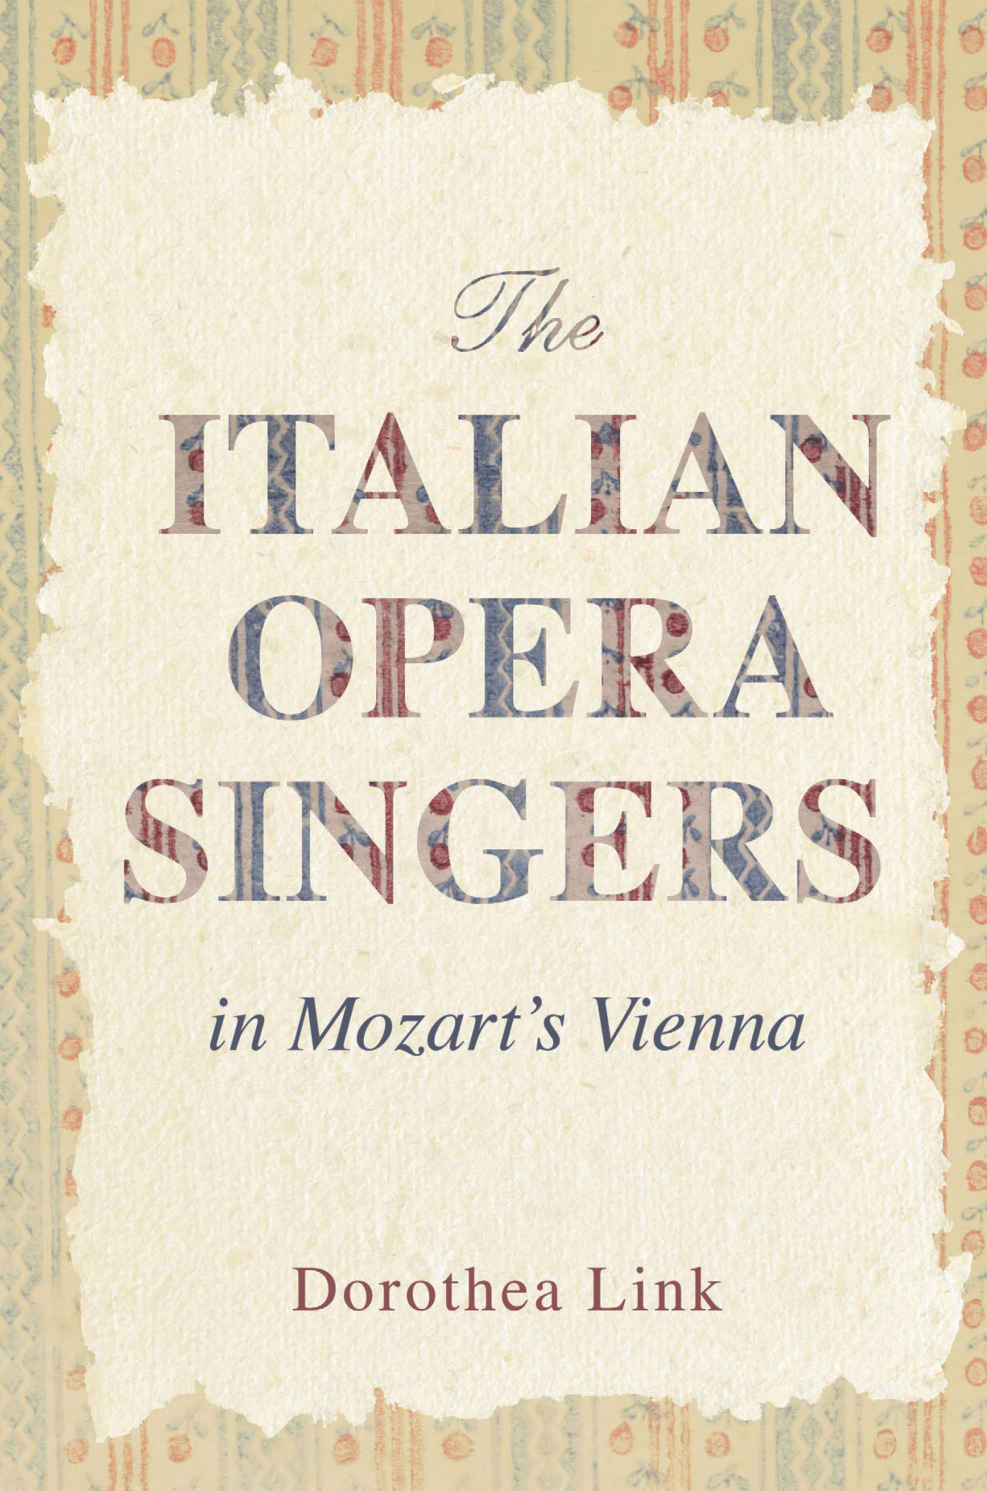 Book cover Dorothea Link The Italian Opera Singers in Mozart’s Vienna